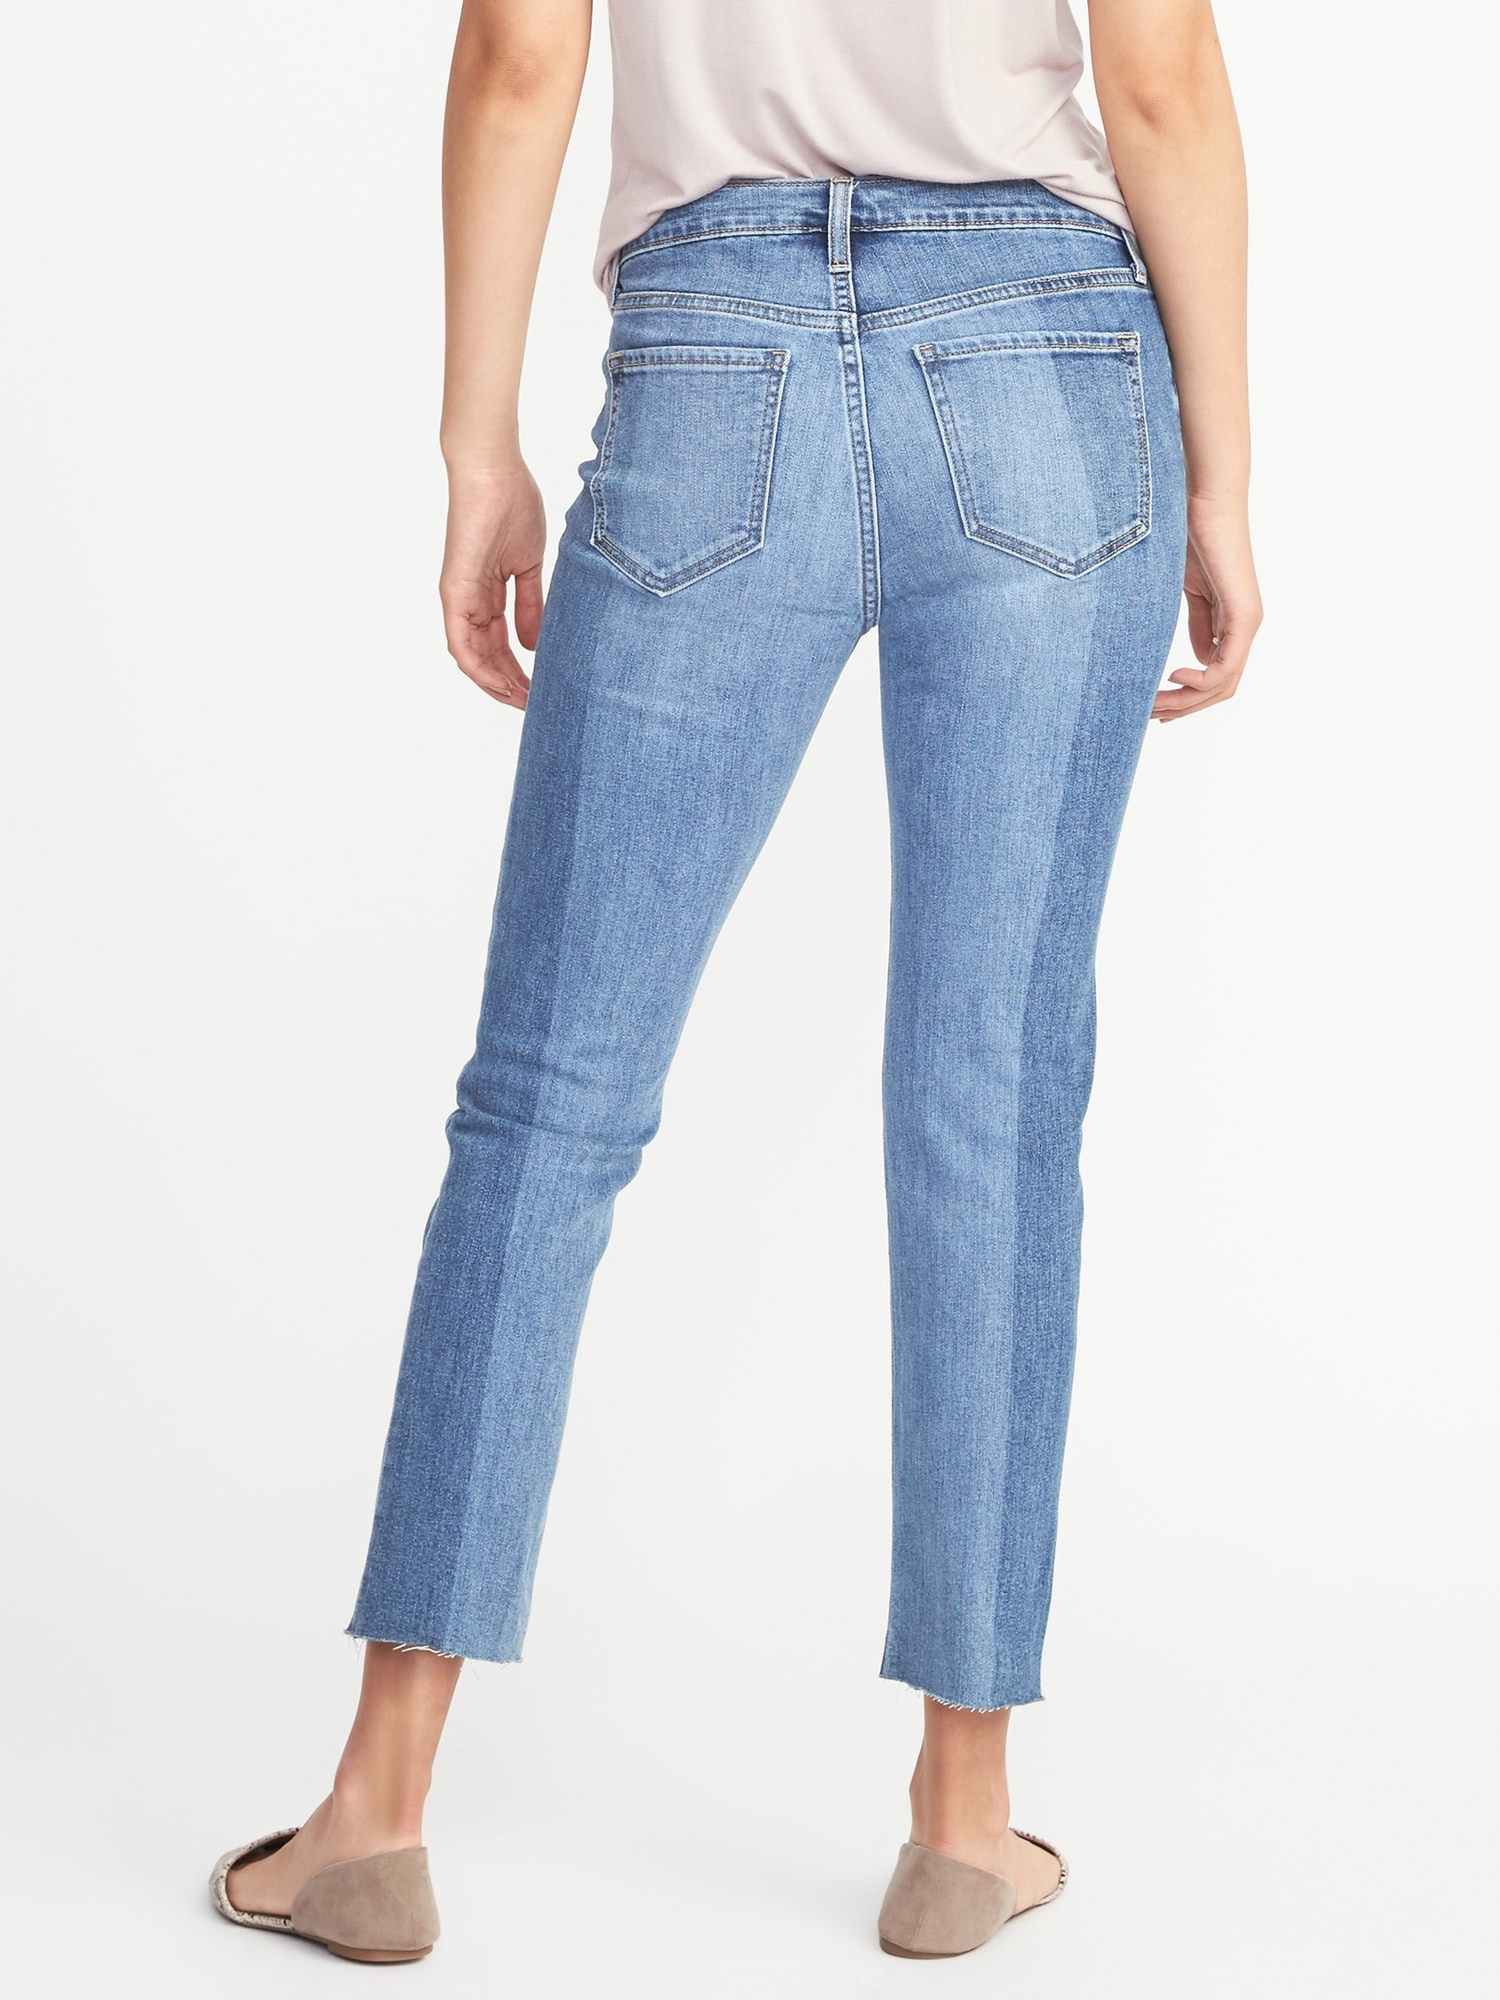 Boyfriend Straight Two-Tone Jeans for Women | Old Navy